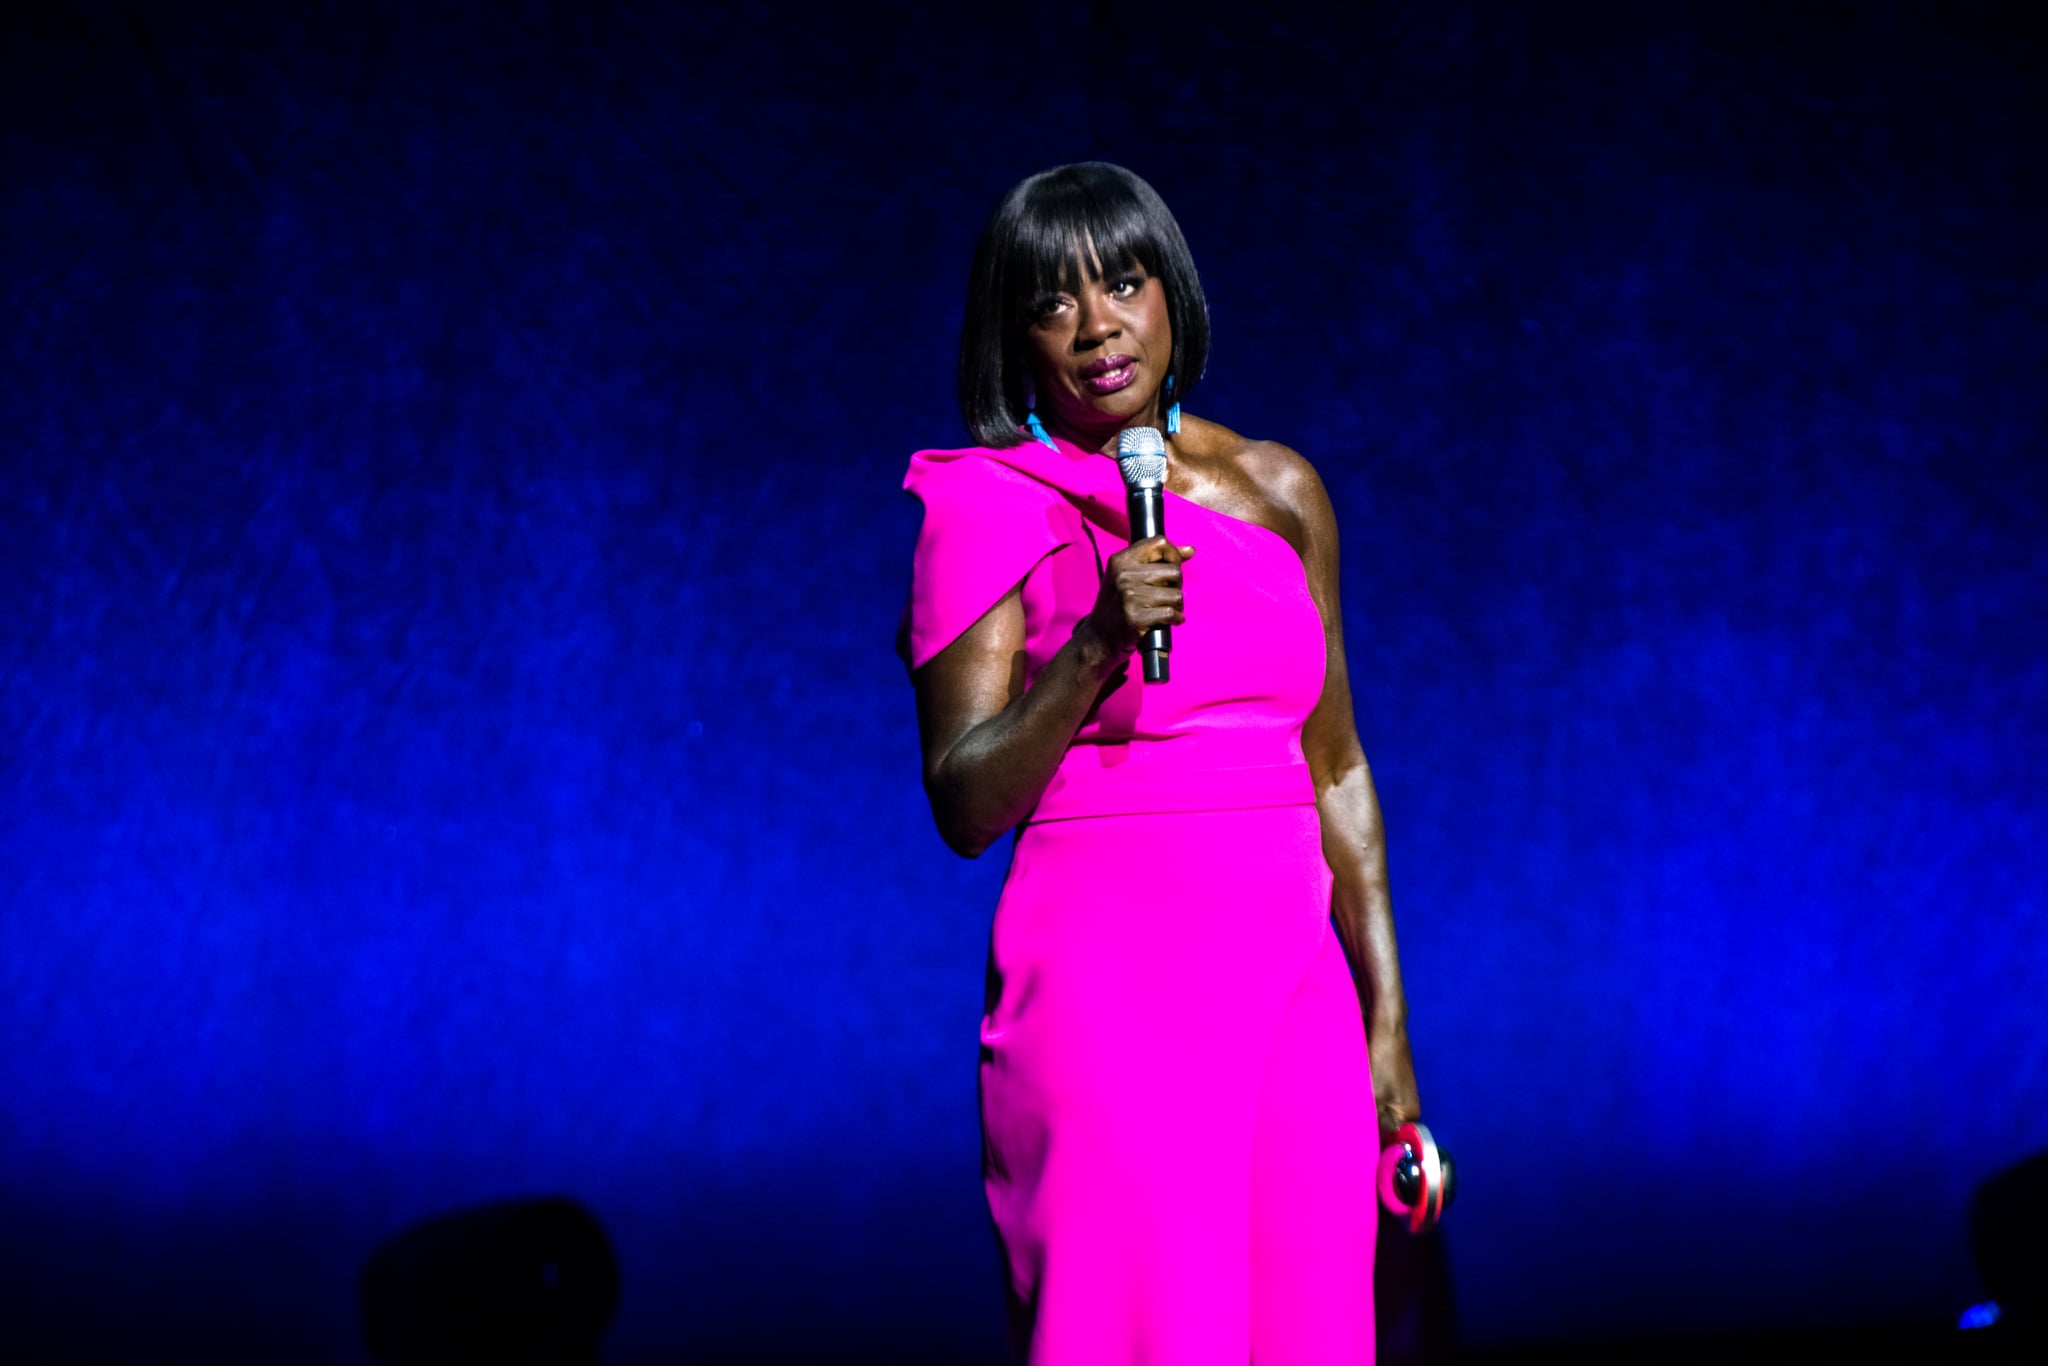 LAS VEGAS, NEVADA - APRIL 25: Actress Viola Davis receives the Cinemacon Trailblazer of the Year award at the CinemaCon opening night and Sony Pictures Entertainment presentation during CinemaCon 2022 at Caesars Palace on April 25, 2022 in Las Vegas, Nevada. (Photo by Greg Doherty/Getty Images)